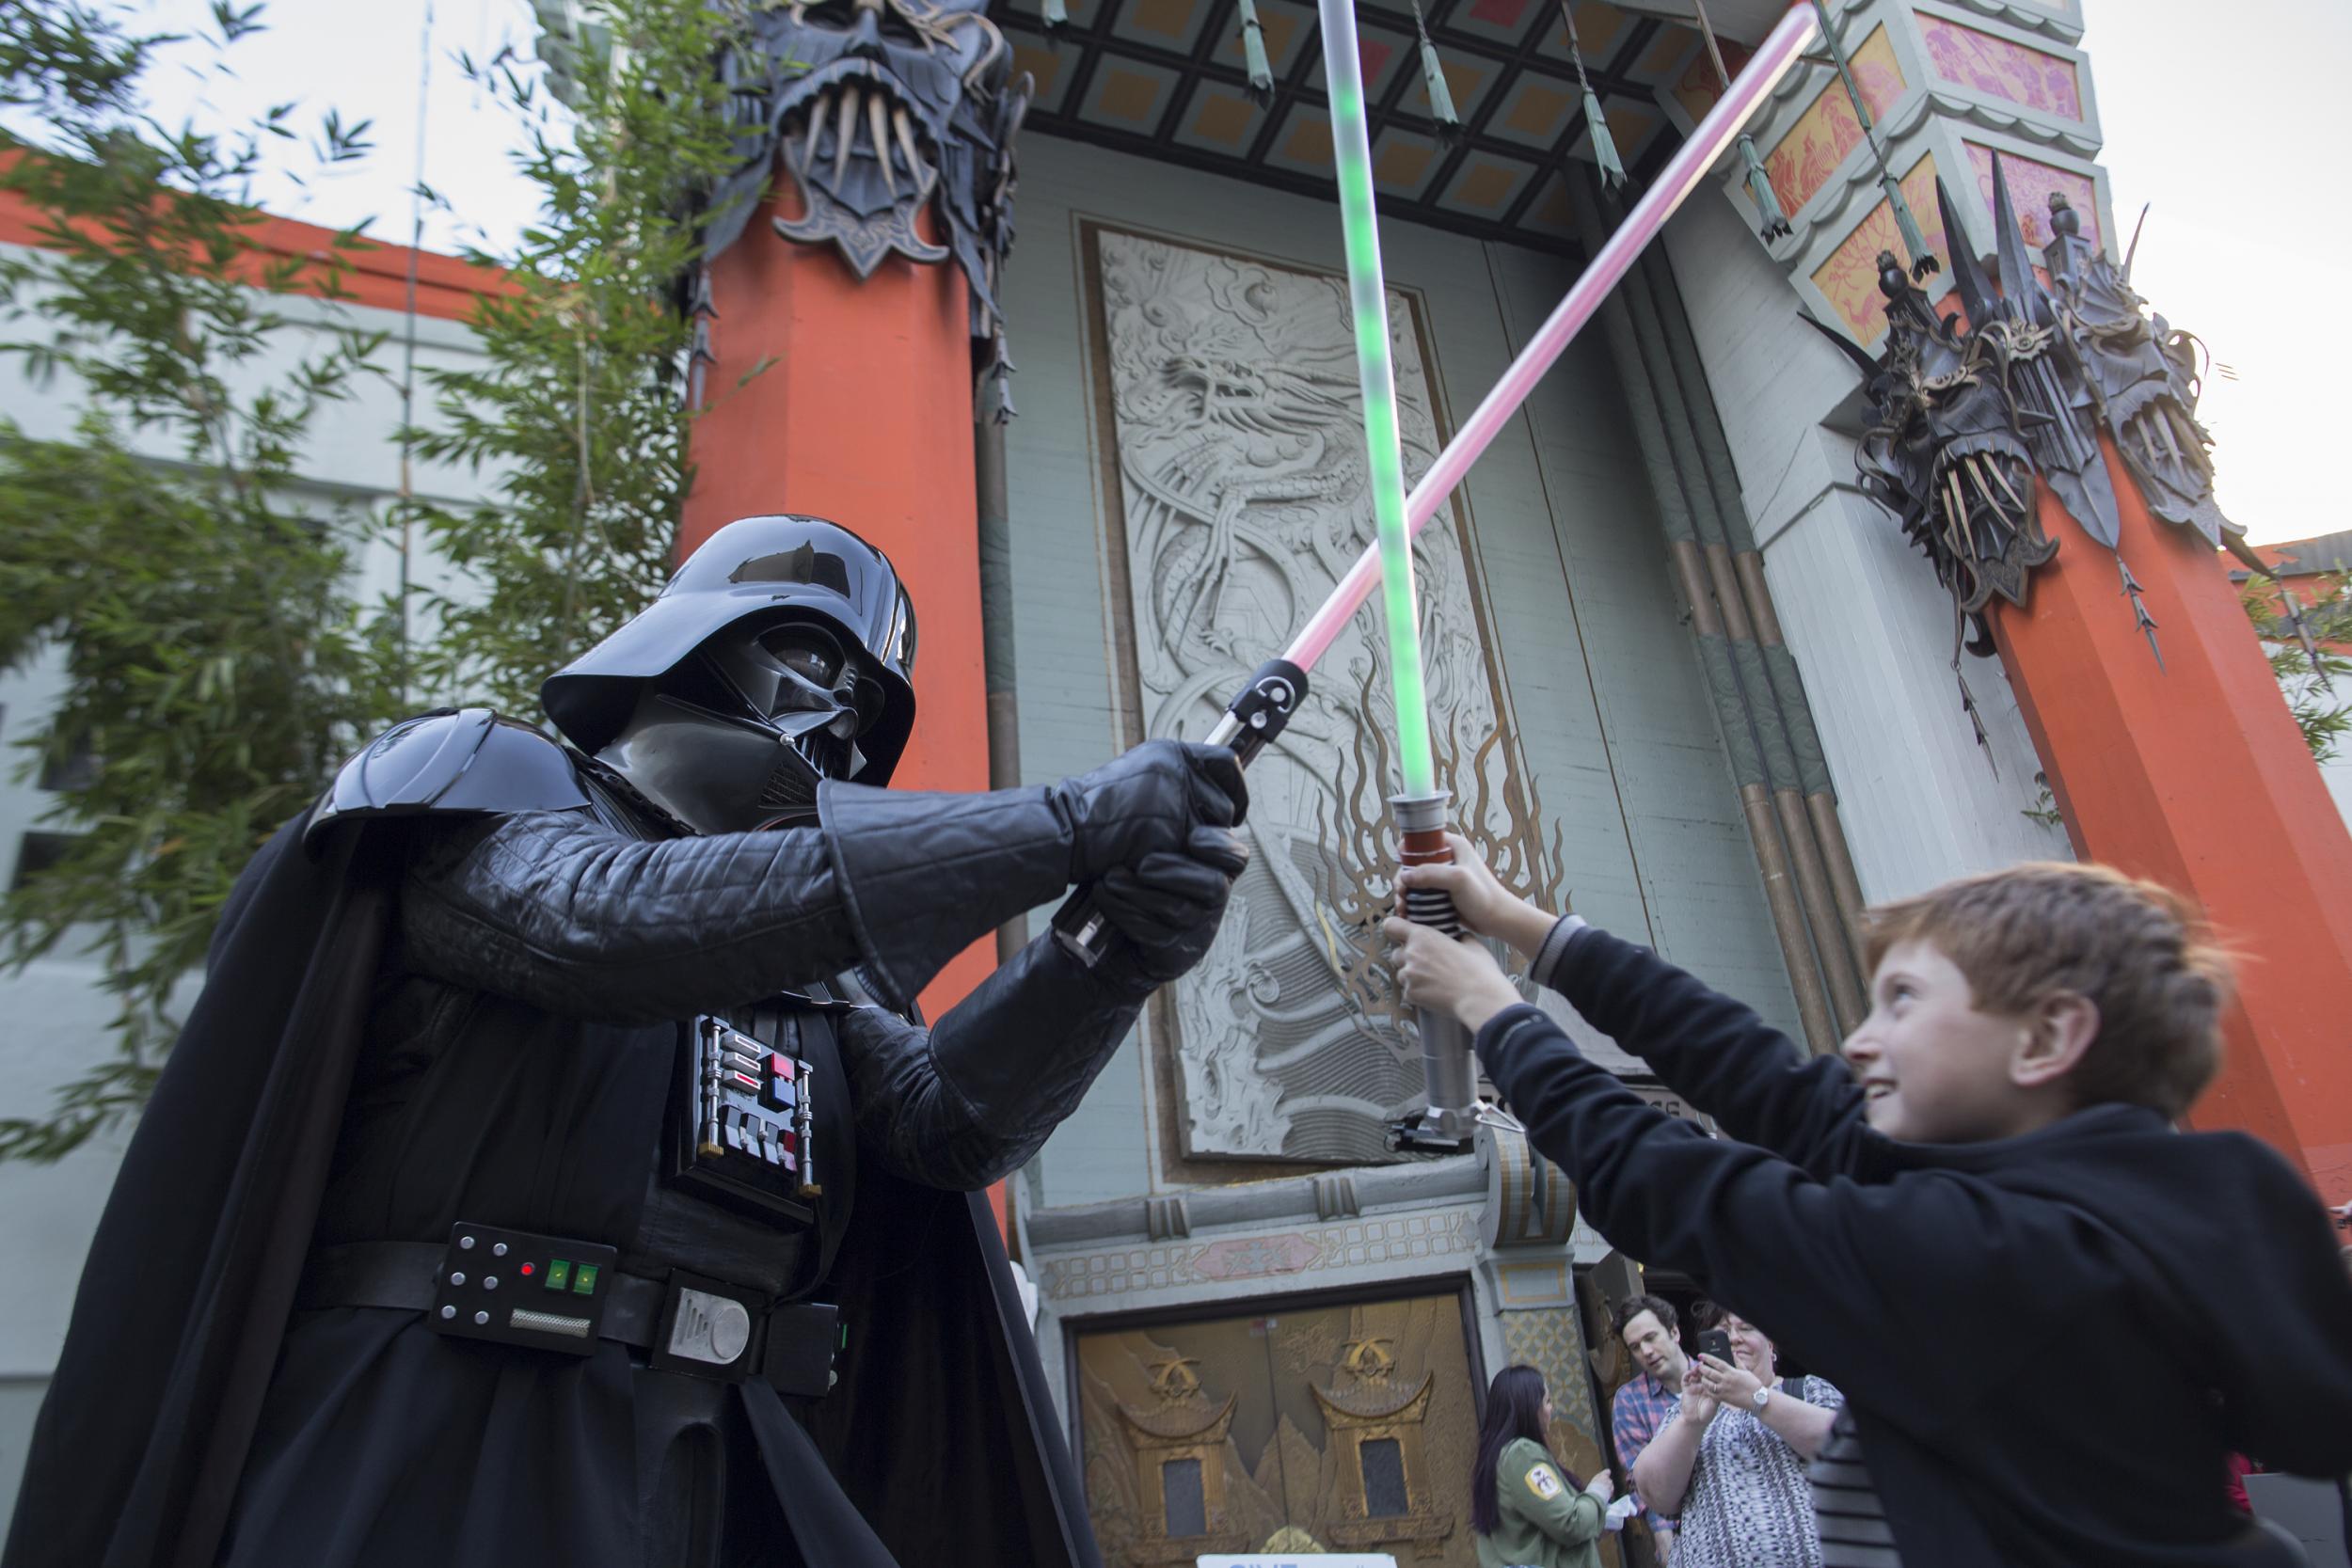 Star Wars fans outside the LC Chinese Theatre in Los Angeles.